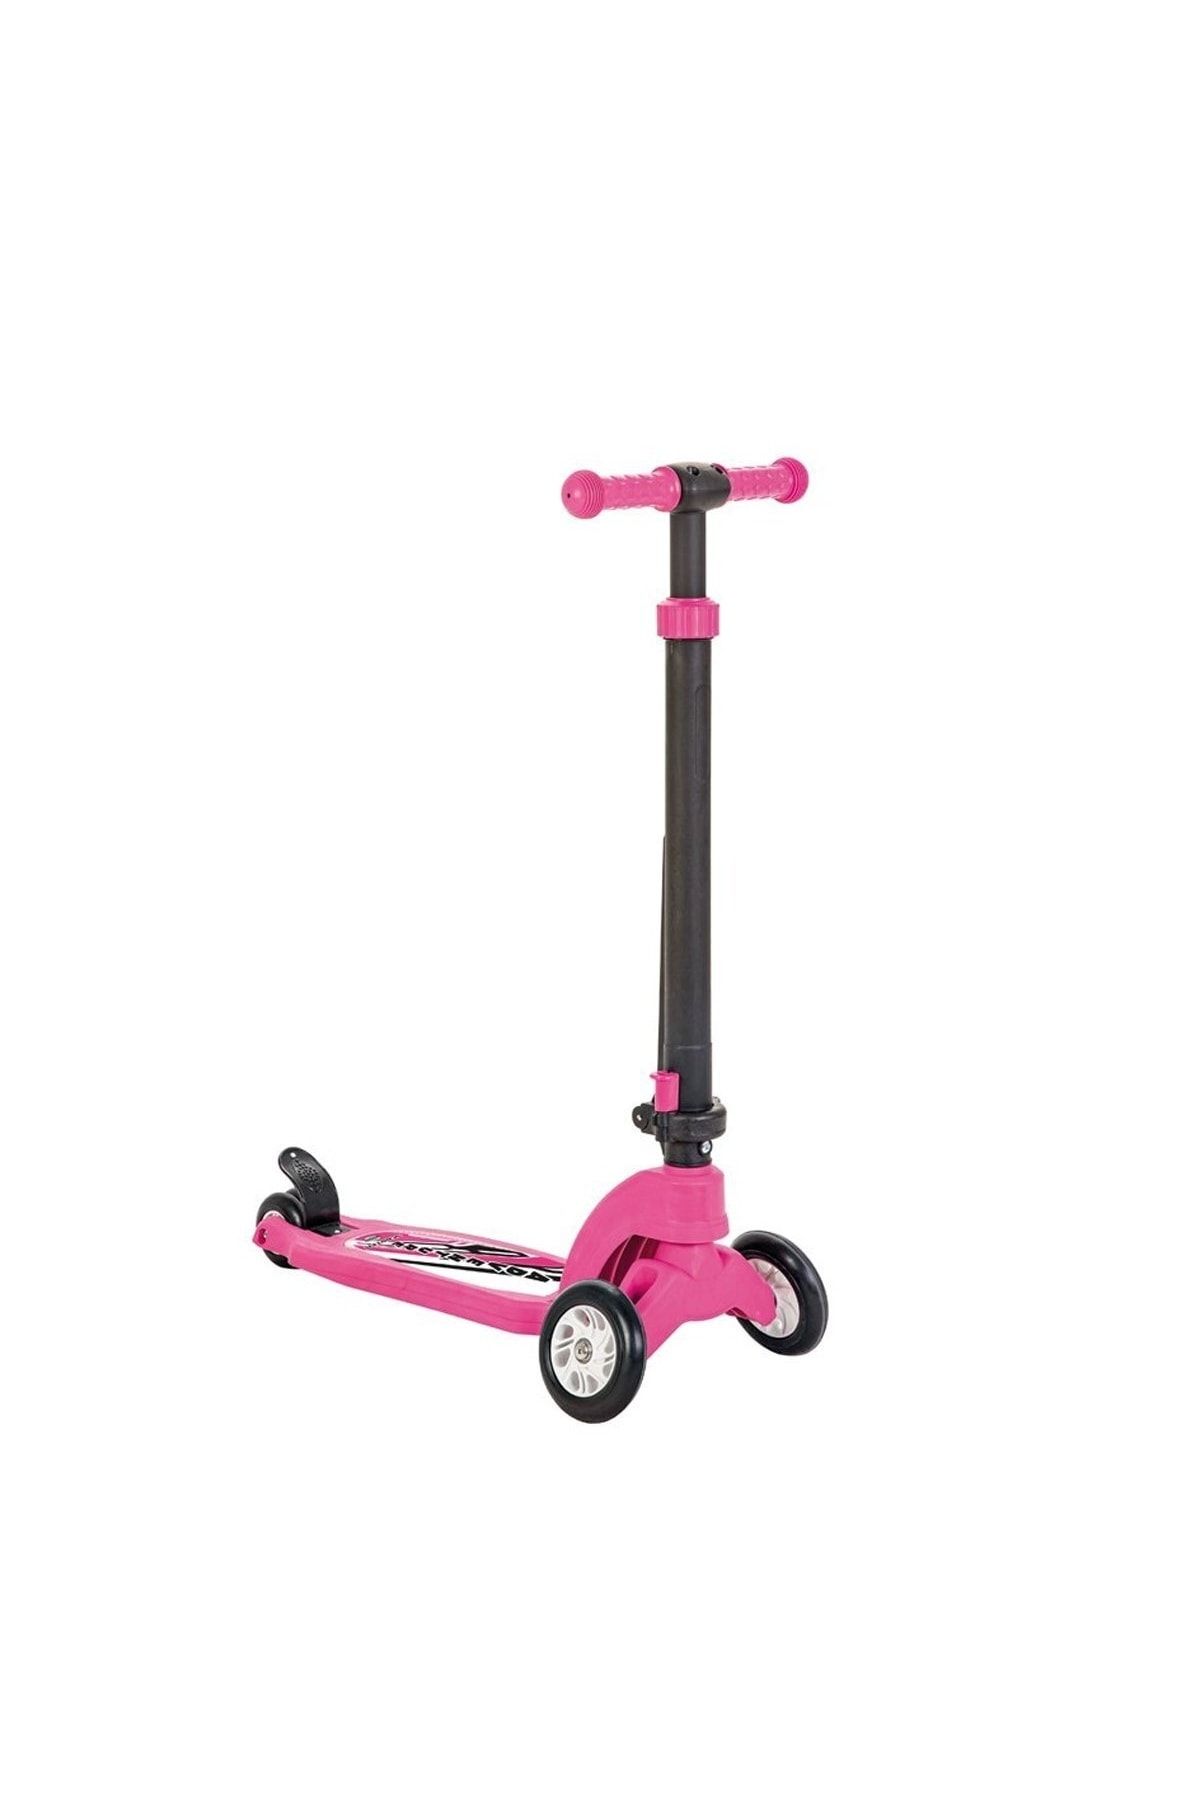 PİLSAN Cool Scooter(pembe).